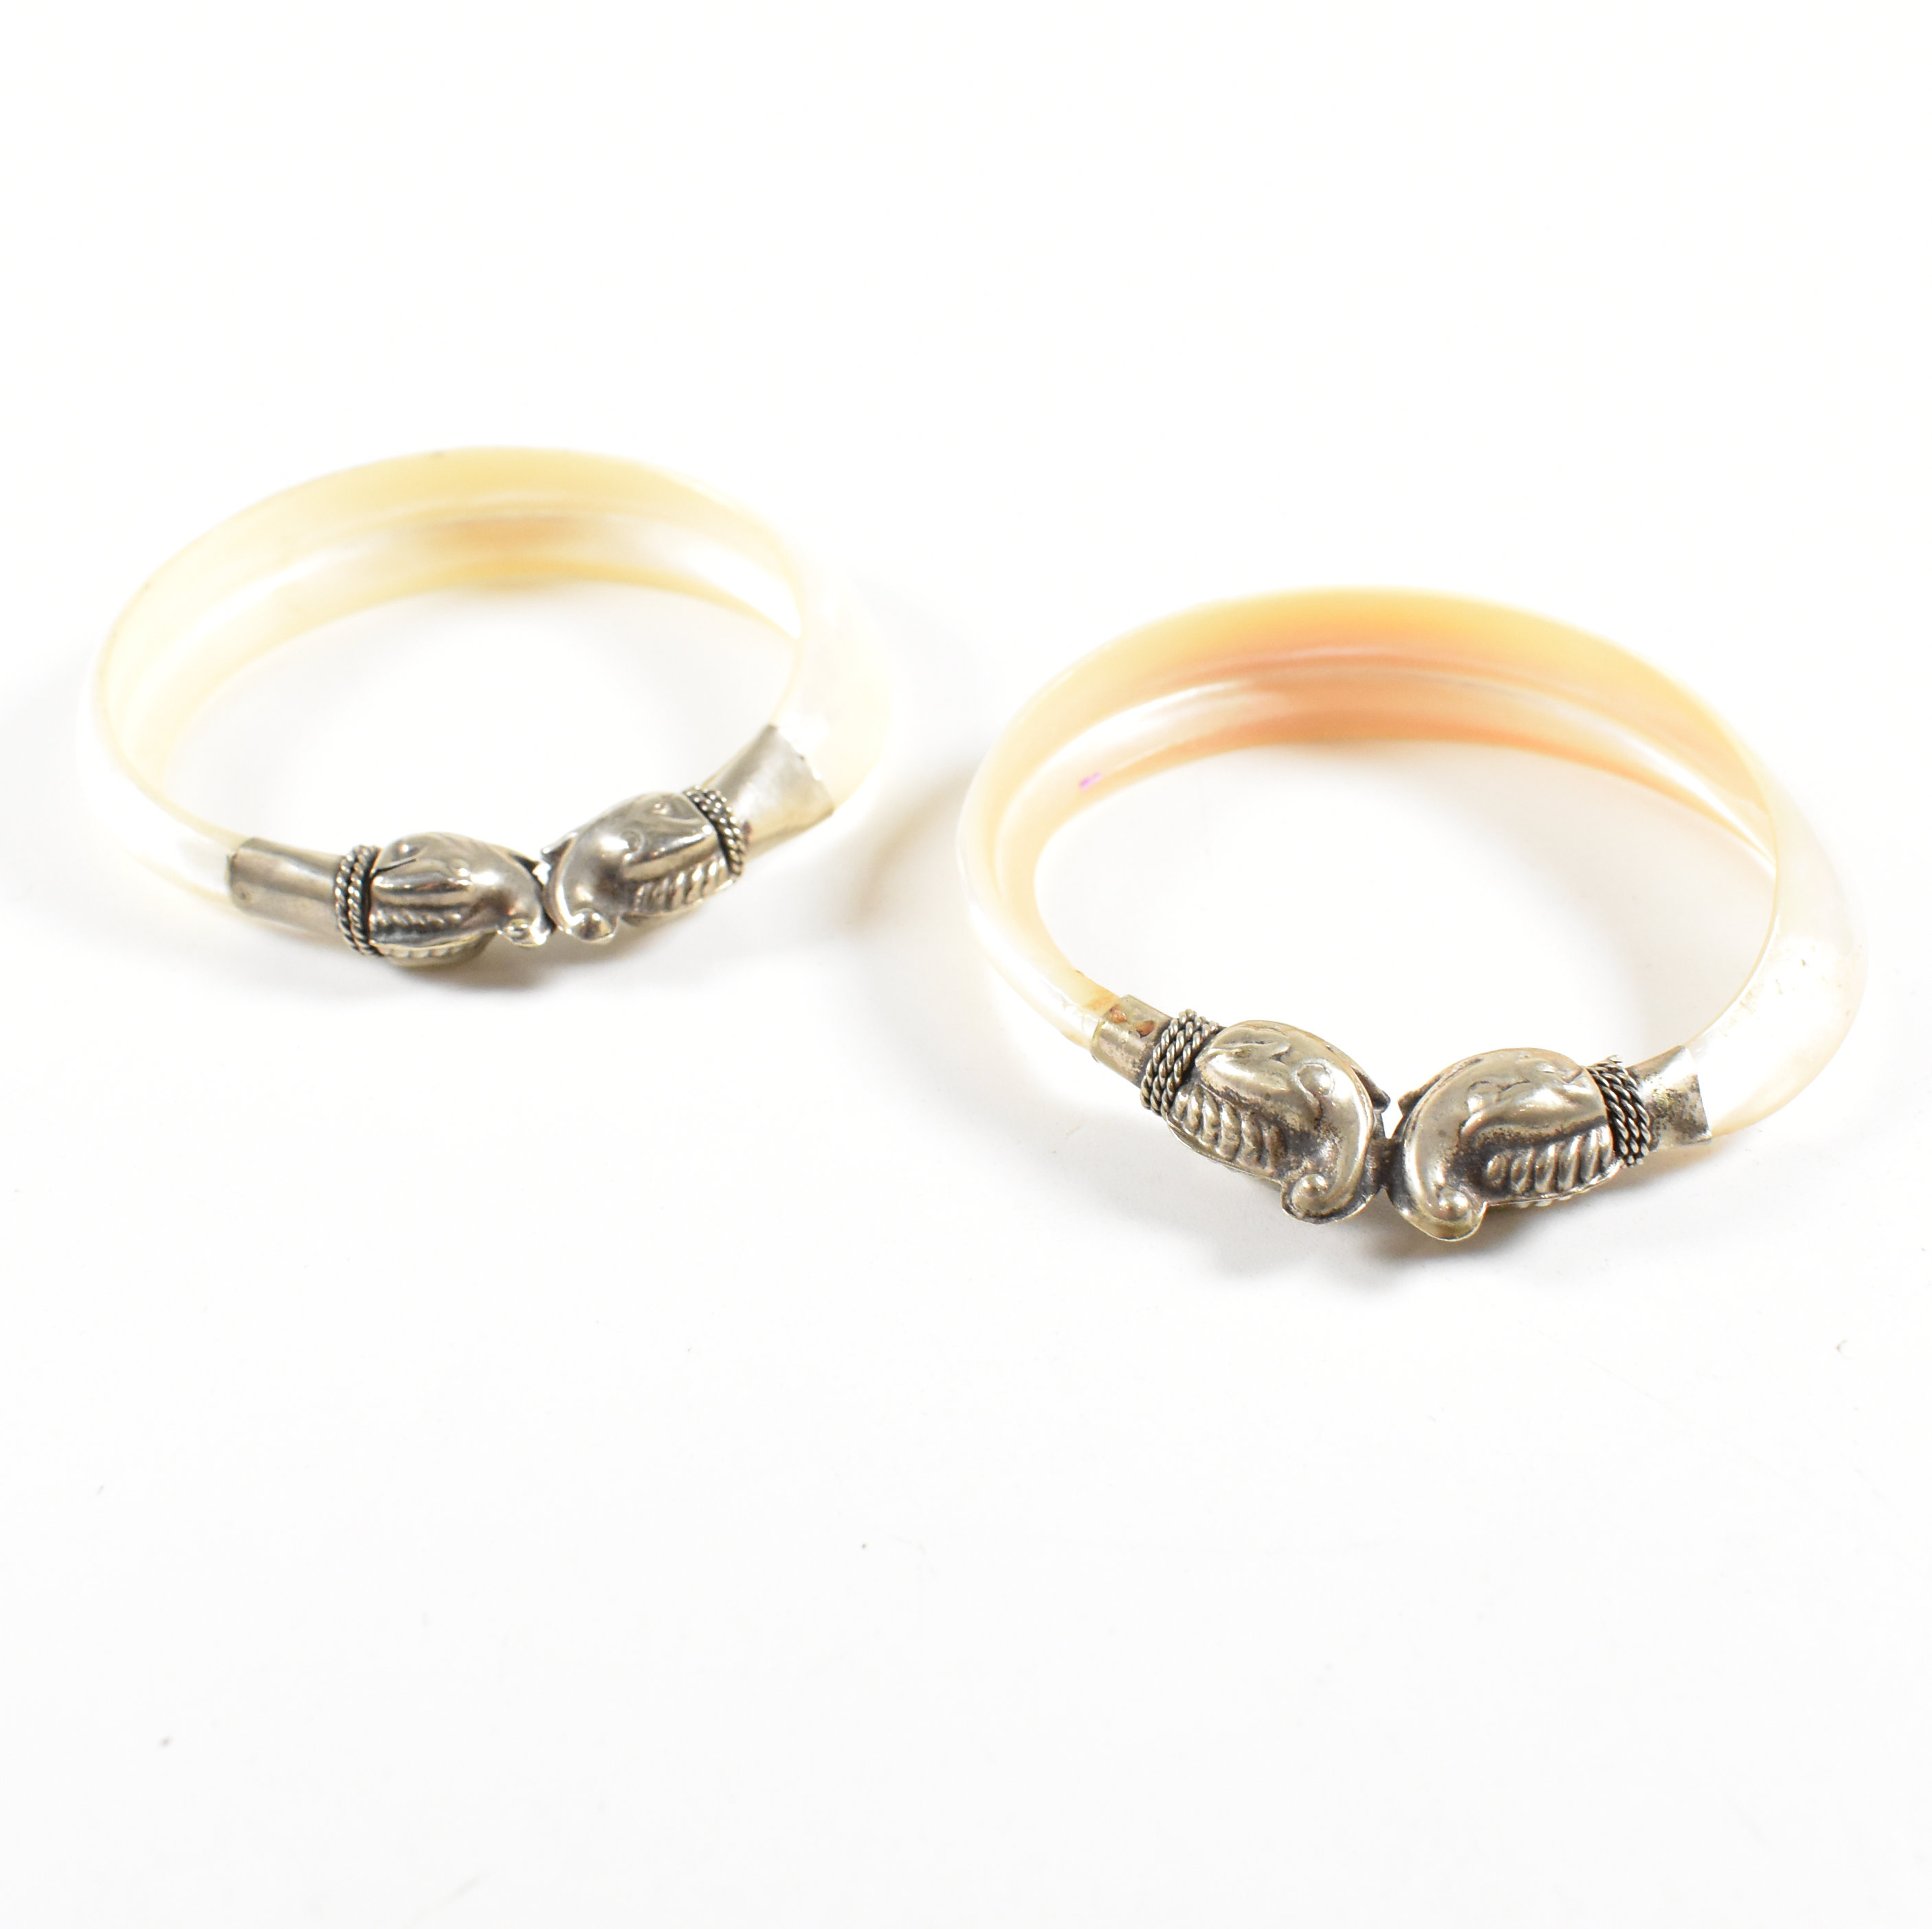 PAIR OF MOTHER OF PEARL BANGLES - Image 4 of 9